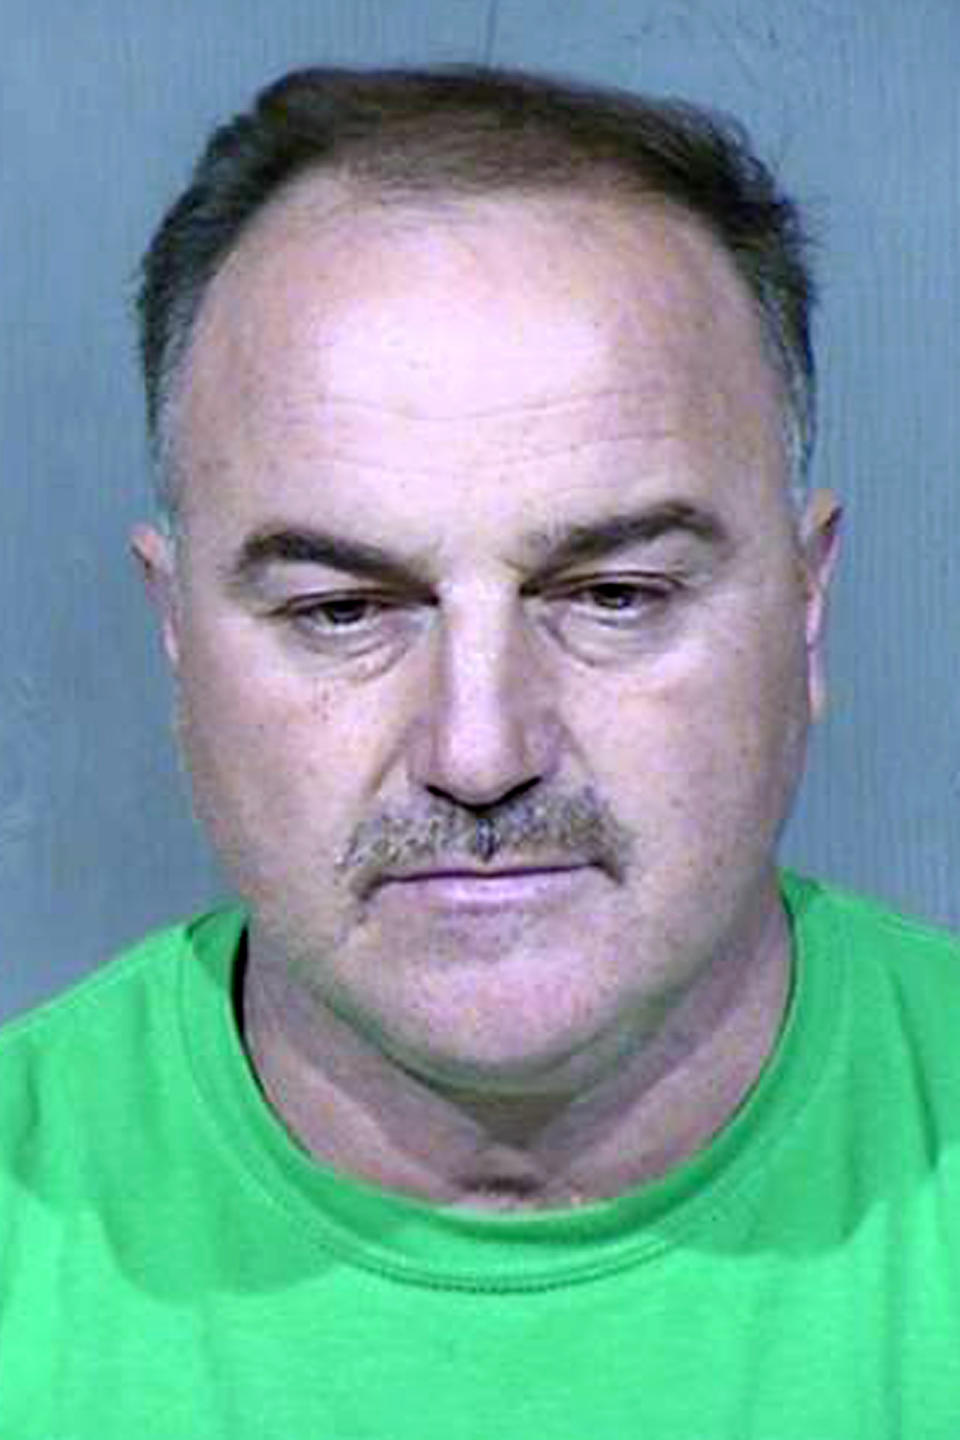 FILE - This undated booking photo provided by the Maricopa County Sheriff's Office shows Ali Yousif Ahmed Al-Nouri, who was arrested in January 2020 in Arizona as part of an extradition request made by the Iraqi government and has been accused of participating in the killings of two police officers nearly 15 years ago in Iraq. Prosecutors on Friday, April 16, 2021, urged a judge to approve the Iraqi government's extradition request for Ahmed, an Iraqi native who came to the United States as a refugee in 2009 and became a U.S. citizen in 2015. Ahmed has denied involvement in the killings. (Maricopa County Sheriff's Office via AP, File)